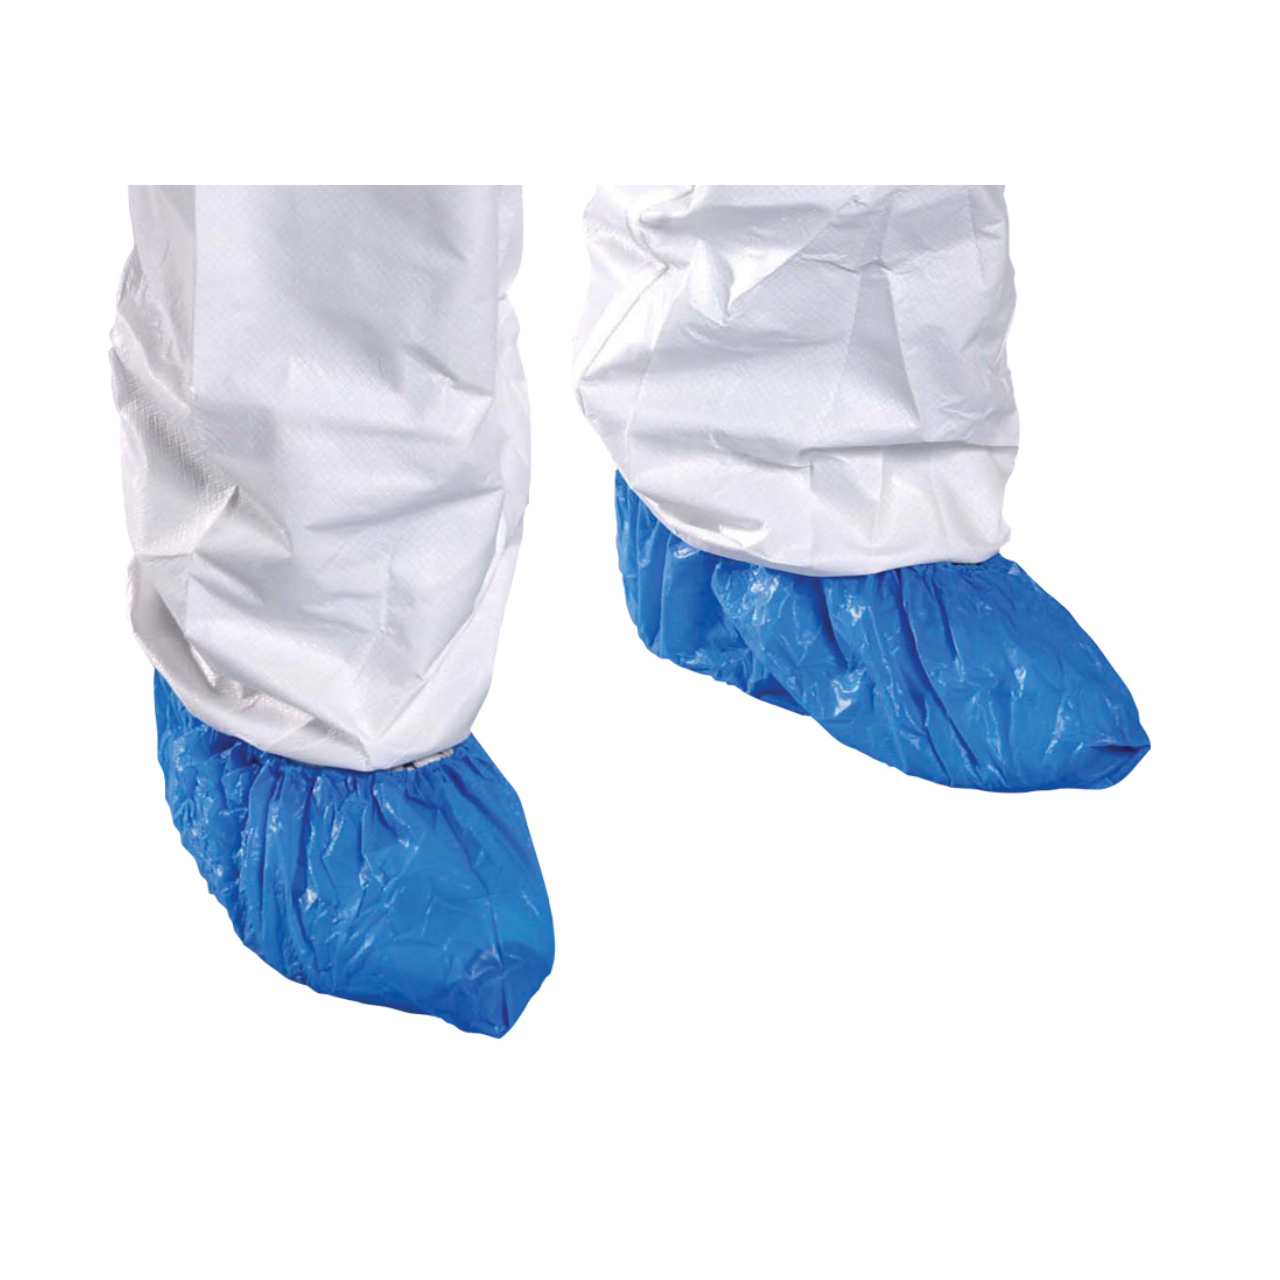 Cleanroom Shoe Covers; CPE, Fluid Impervious, XL, 500 pairs/case, Blue ...